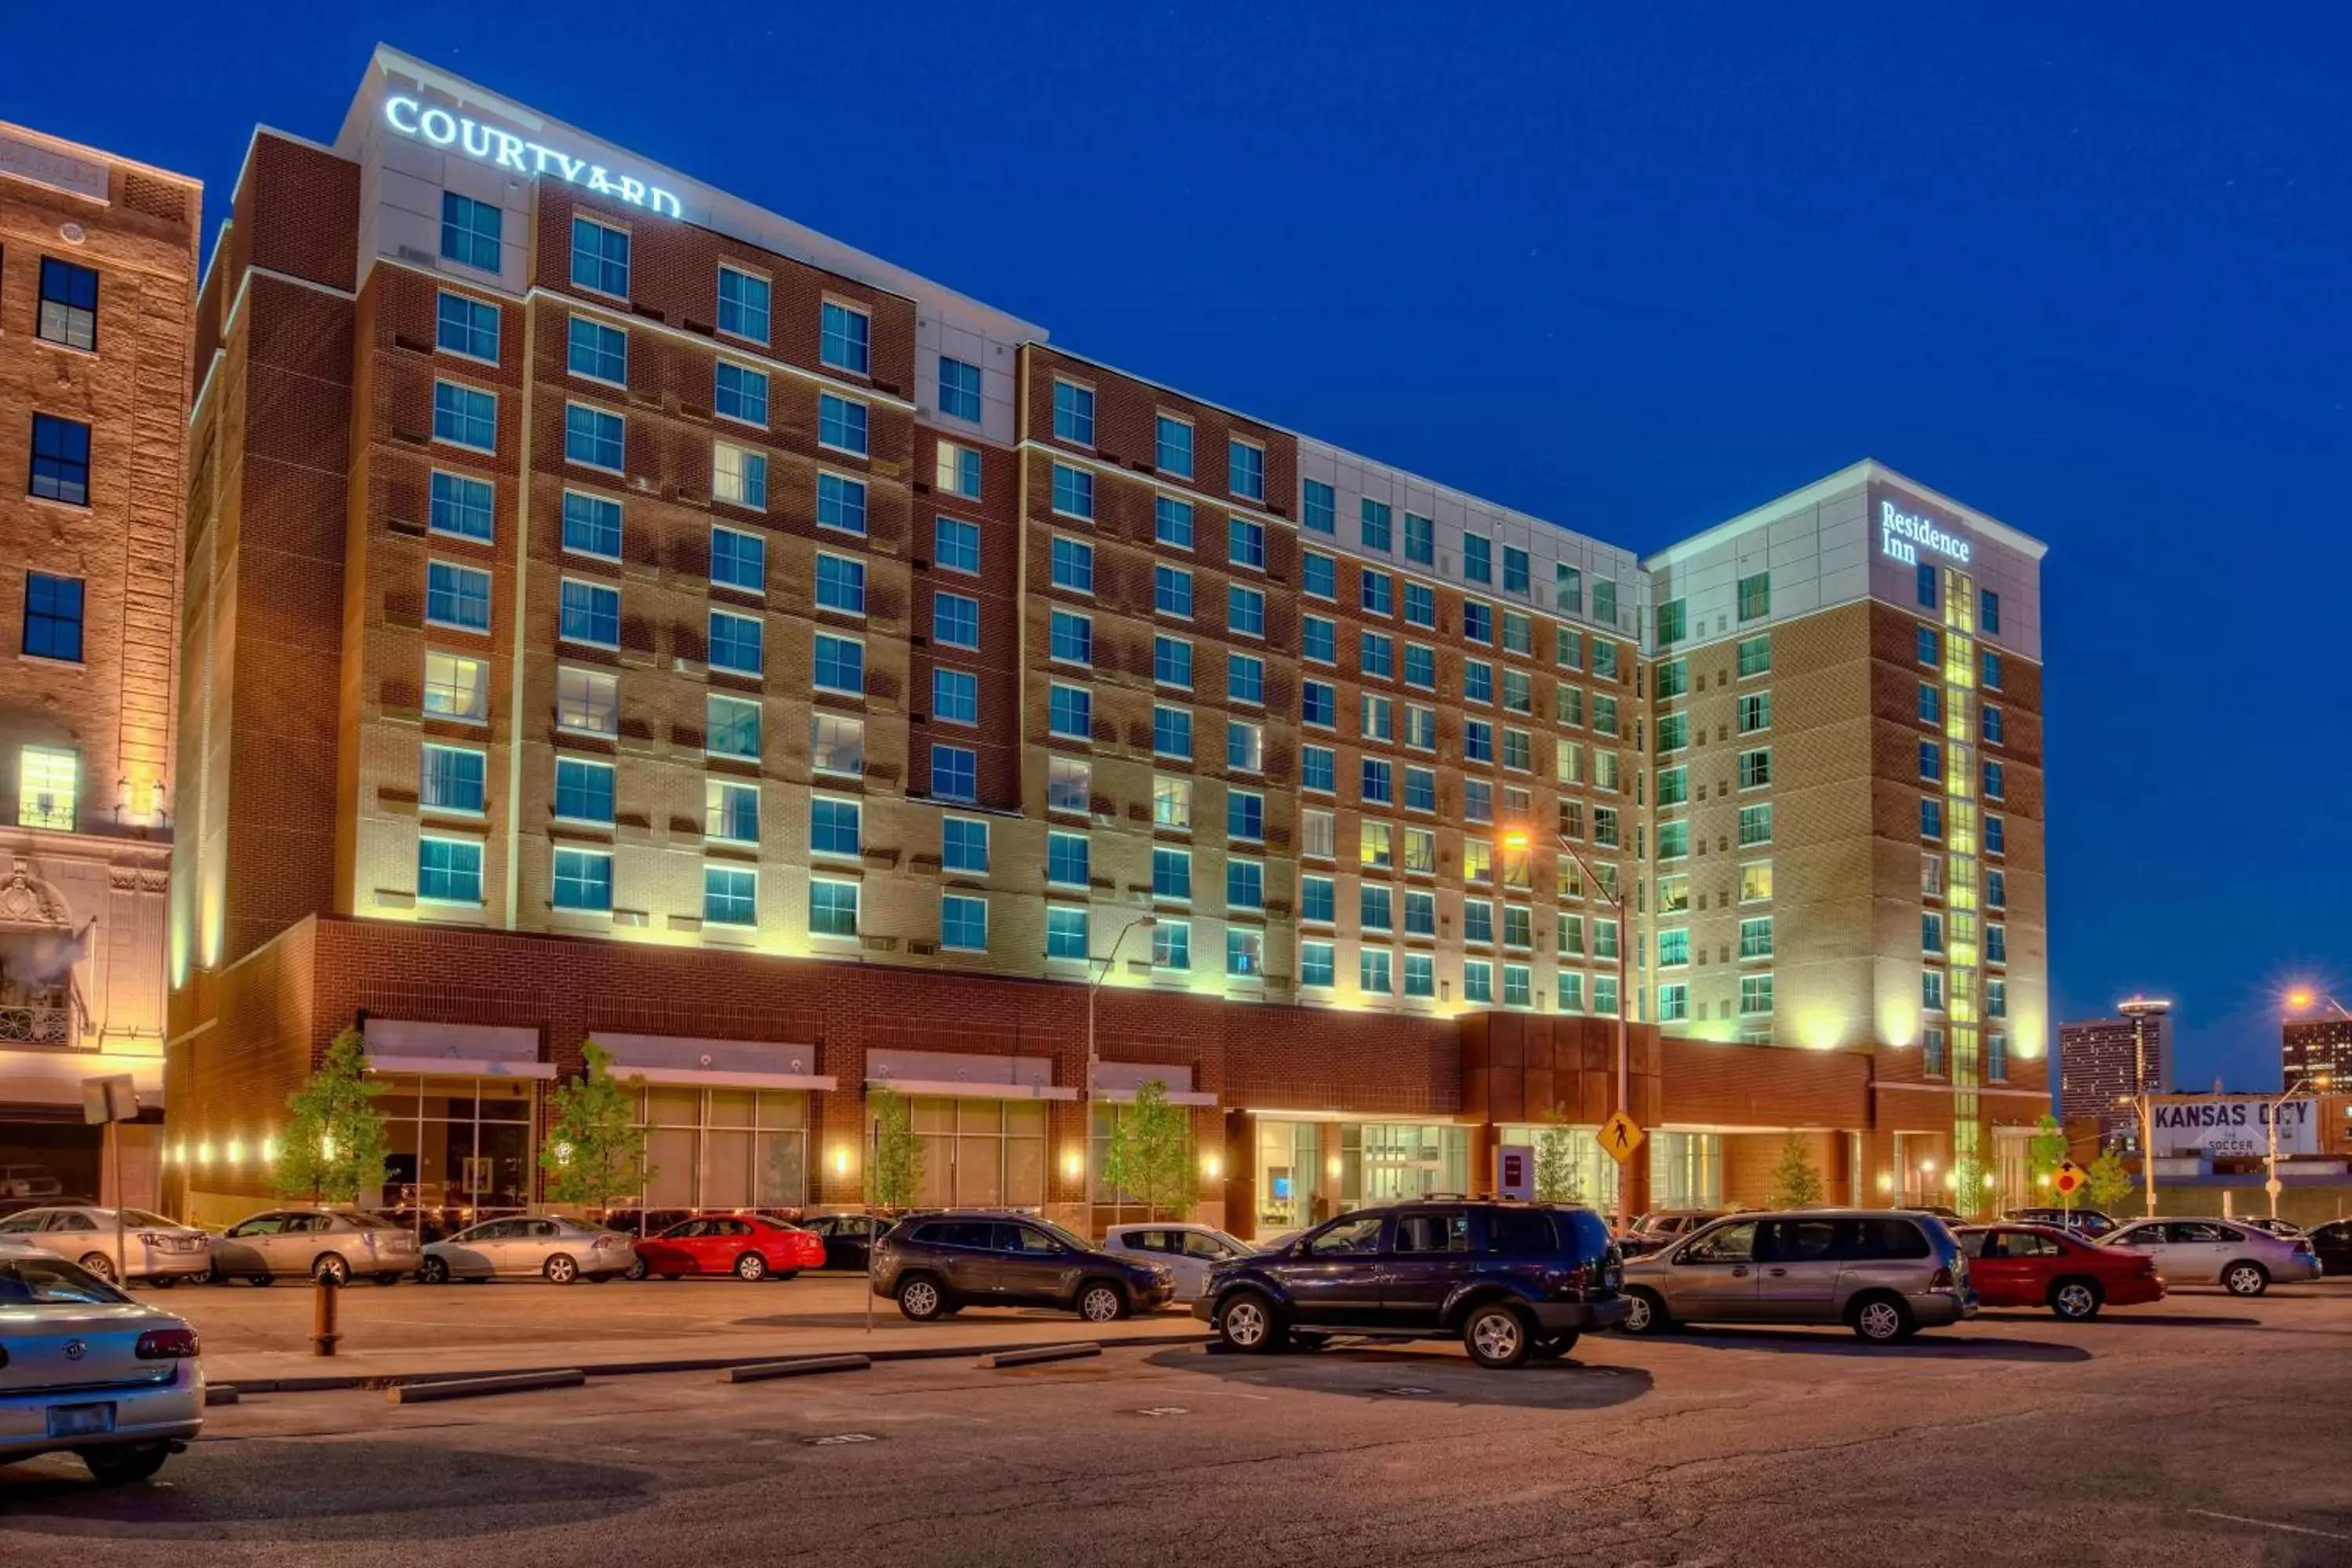 Property Building in Courtyard by Marriott Kansas City Downtown/Convention Center